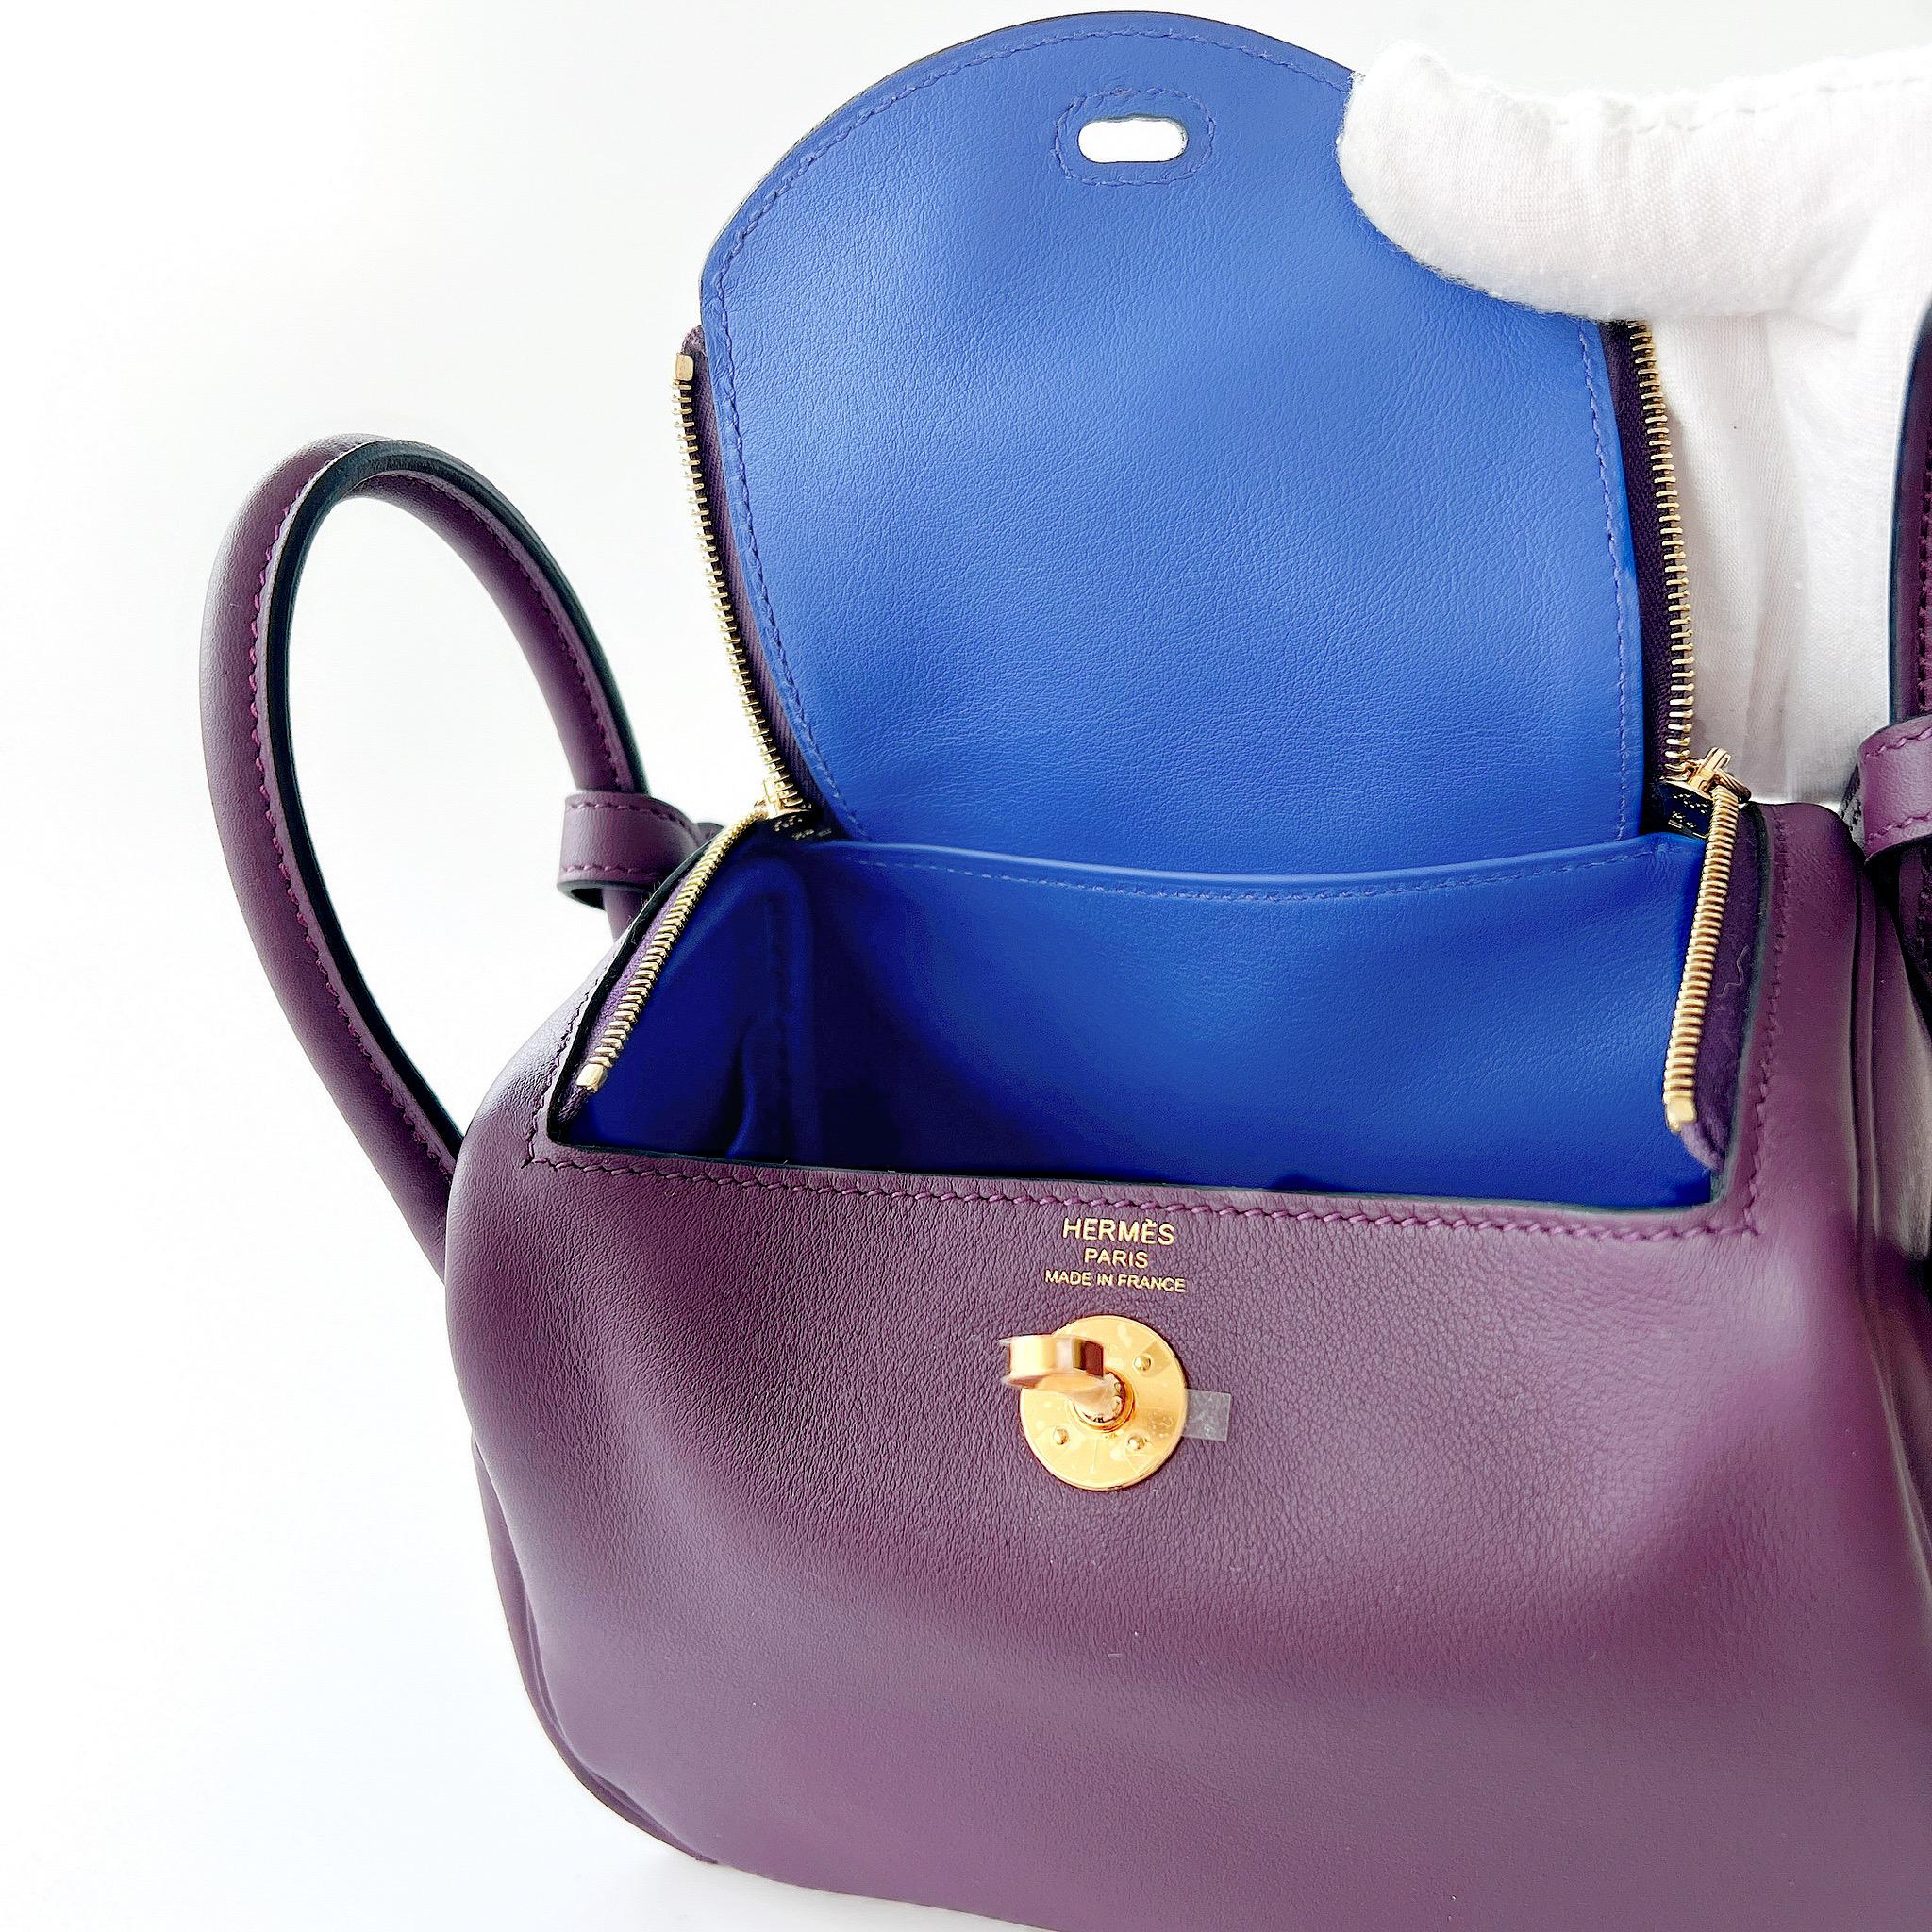 Hermes Rare Mini Lindy In Cassis And Royal Bleu, With Gold Hardware 2